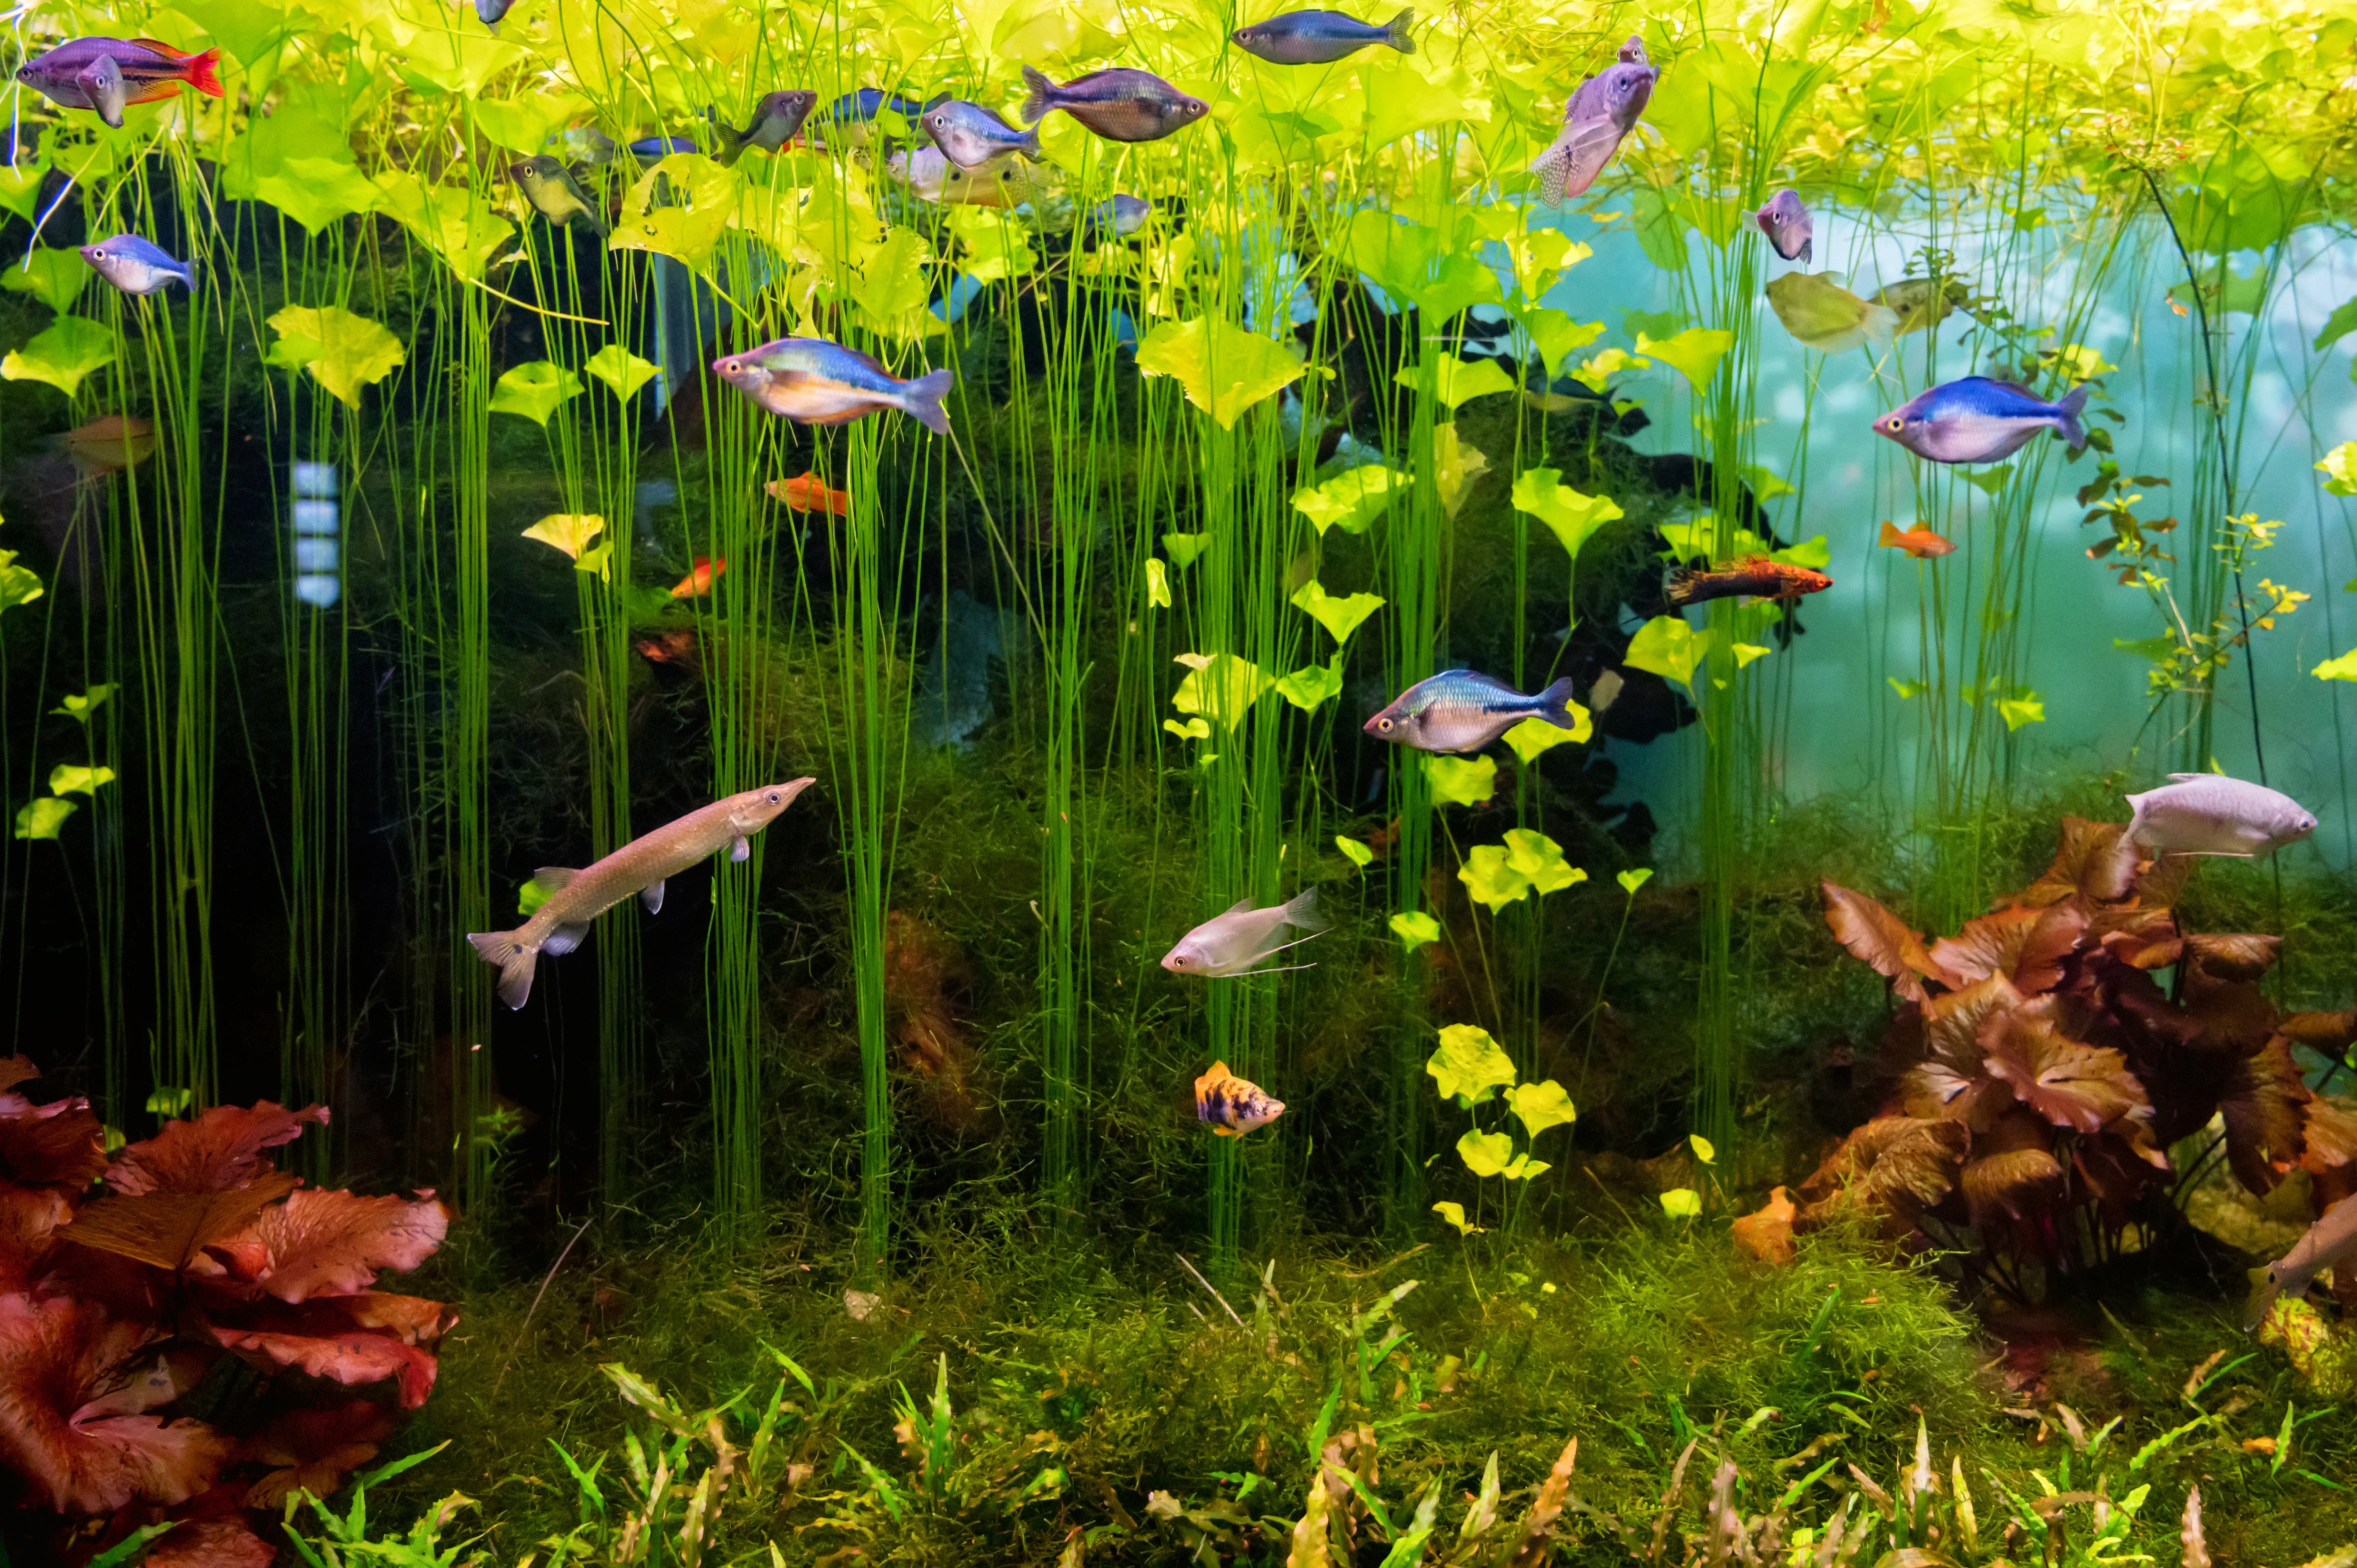 The Art of Aquarium Aquaponics: Combining Hydroponics and Fishkeeping for a Sustainable Ecosystem